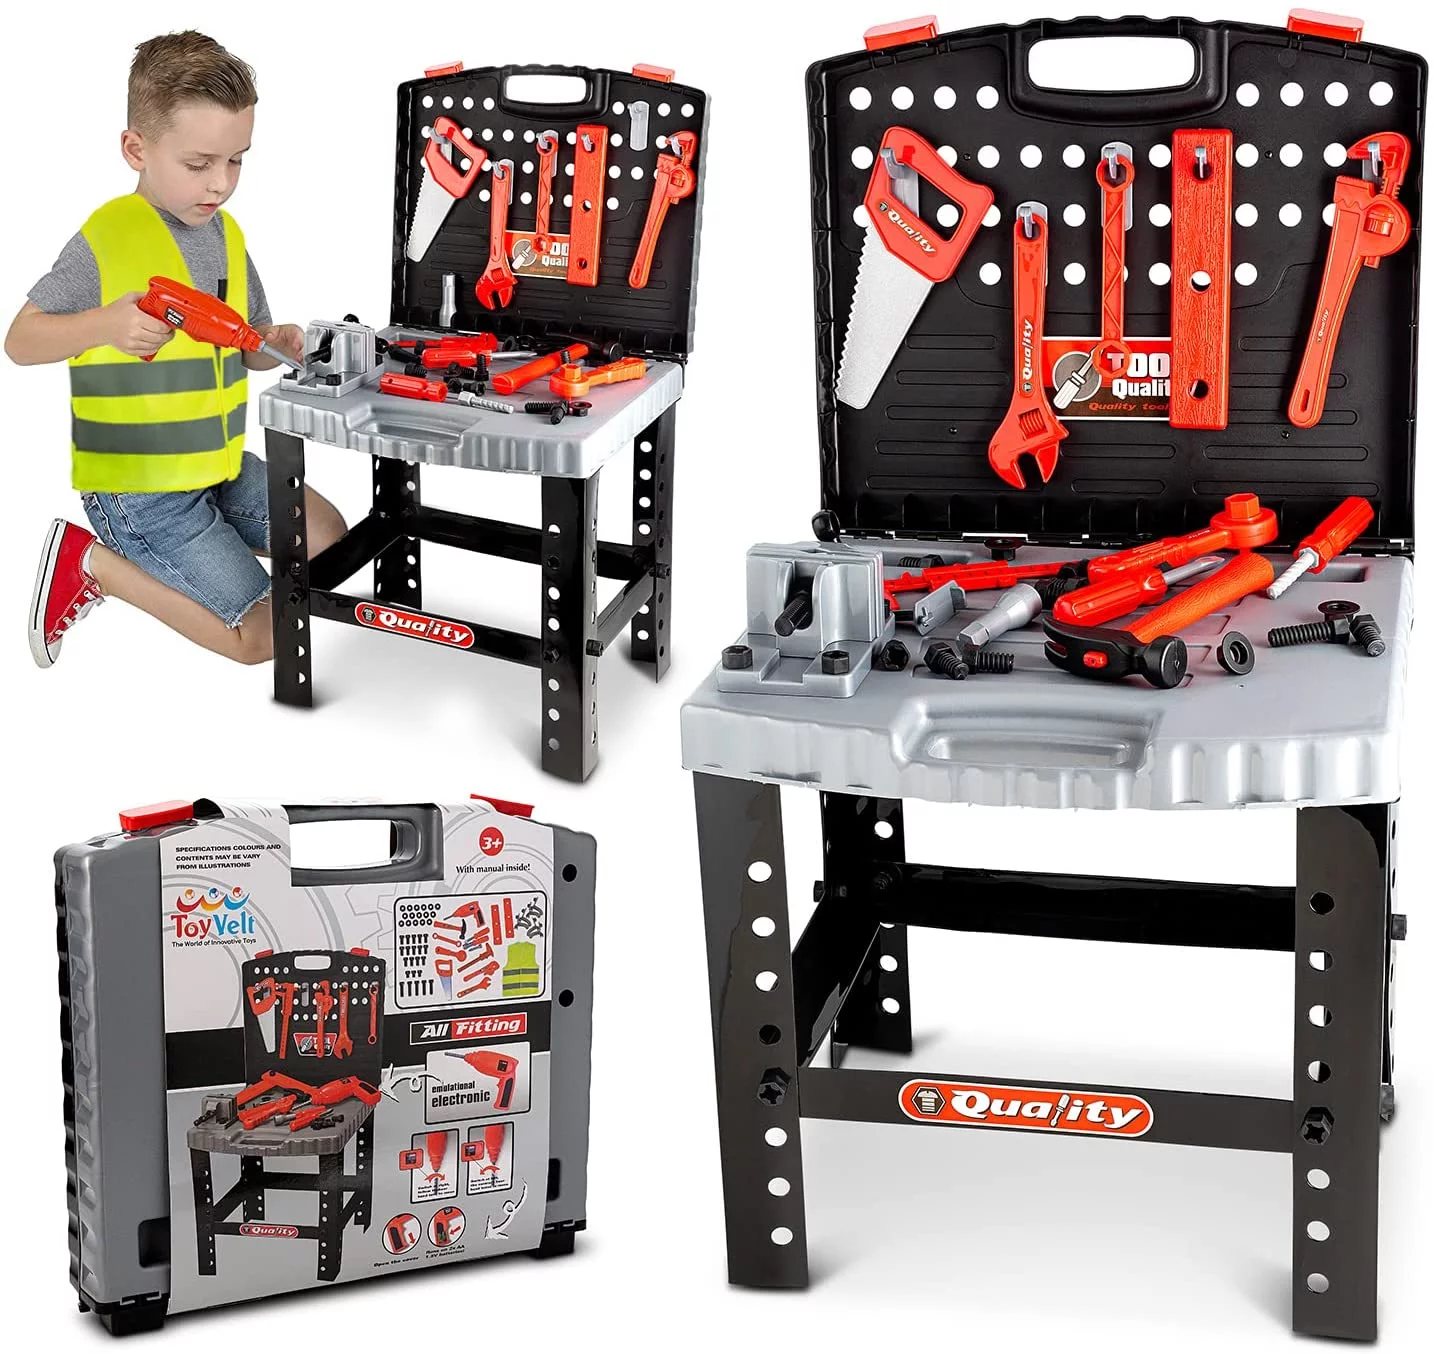 Toyvelt / Kids Toy Workbench and Electric Drill / Plastic / 2-10 years old